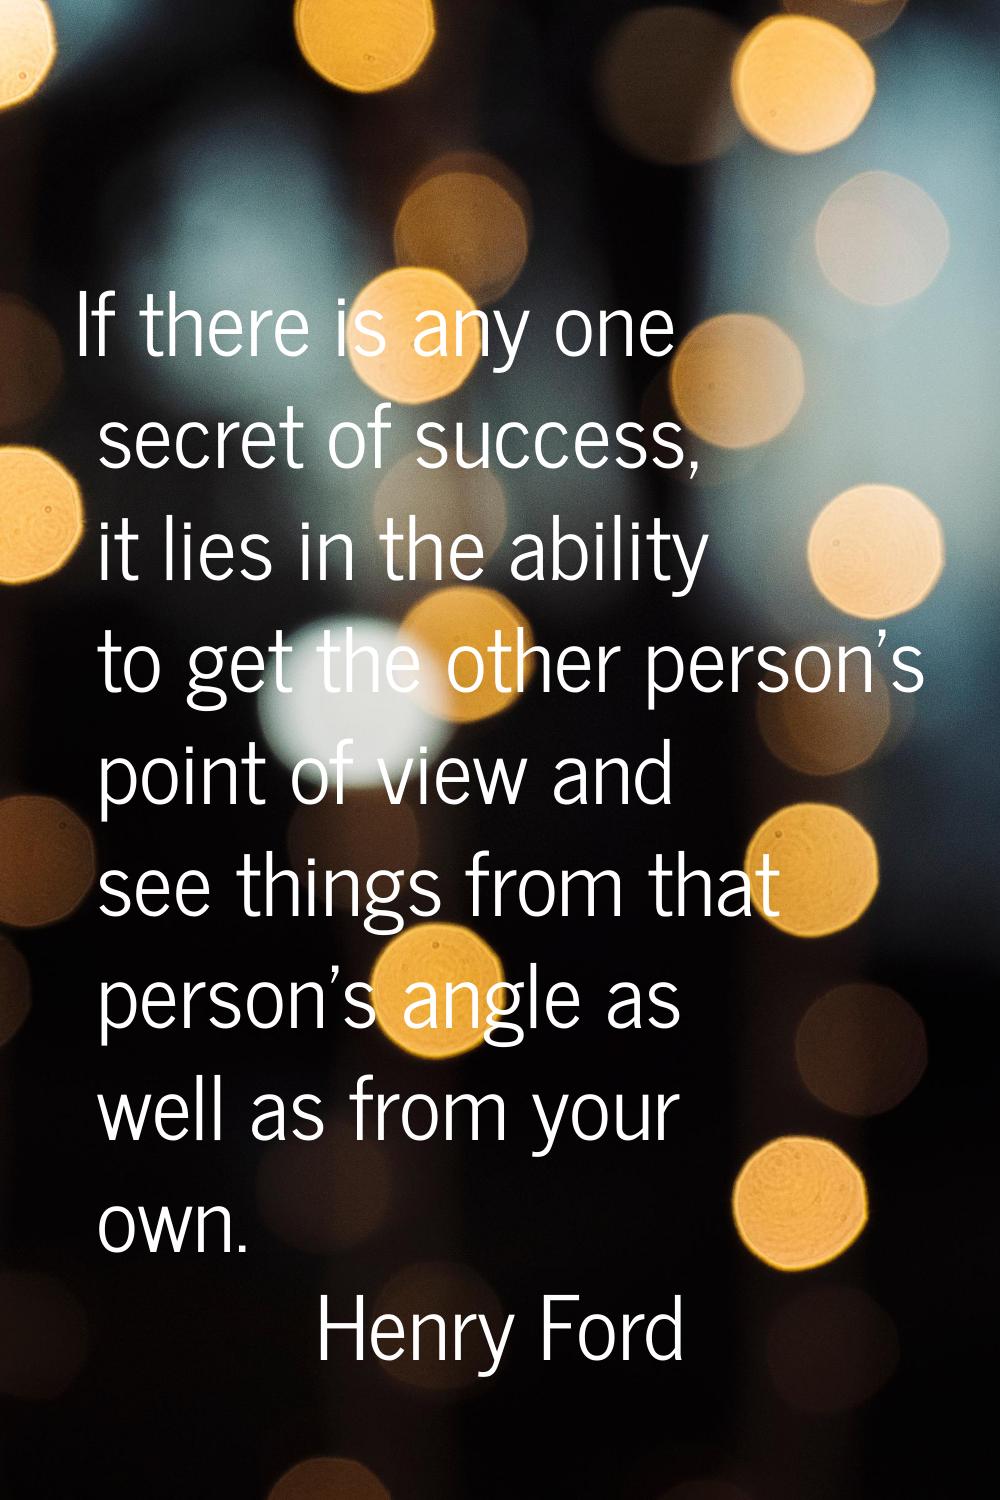 If there is any one secret of success, it lies in the ability to get the other person's point of vi